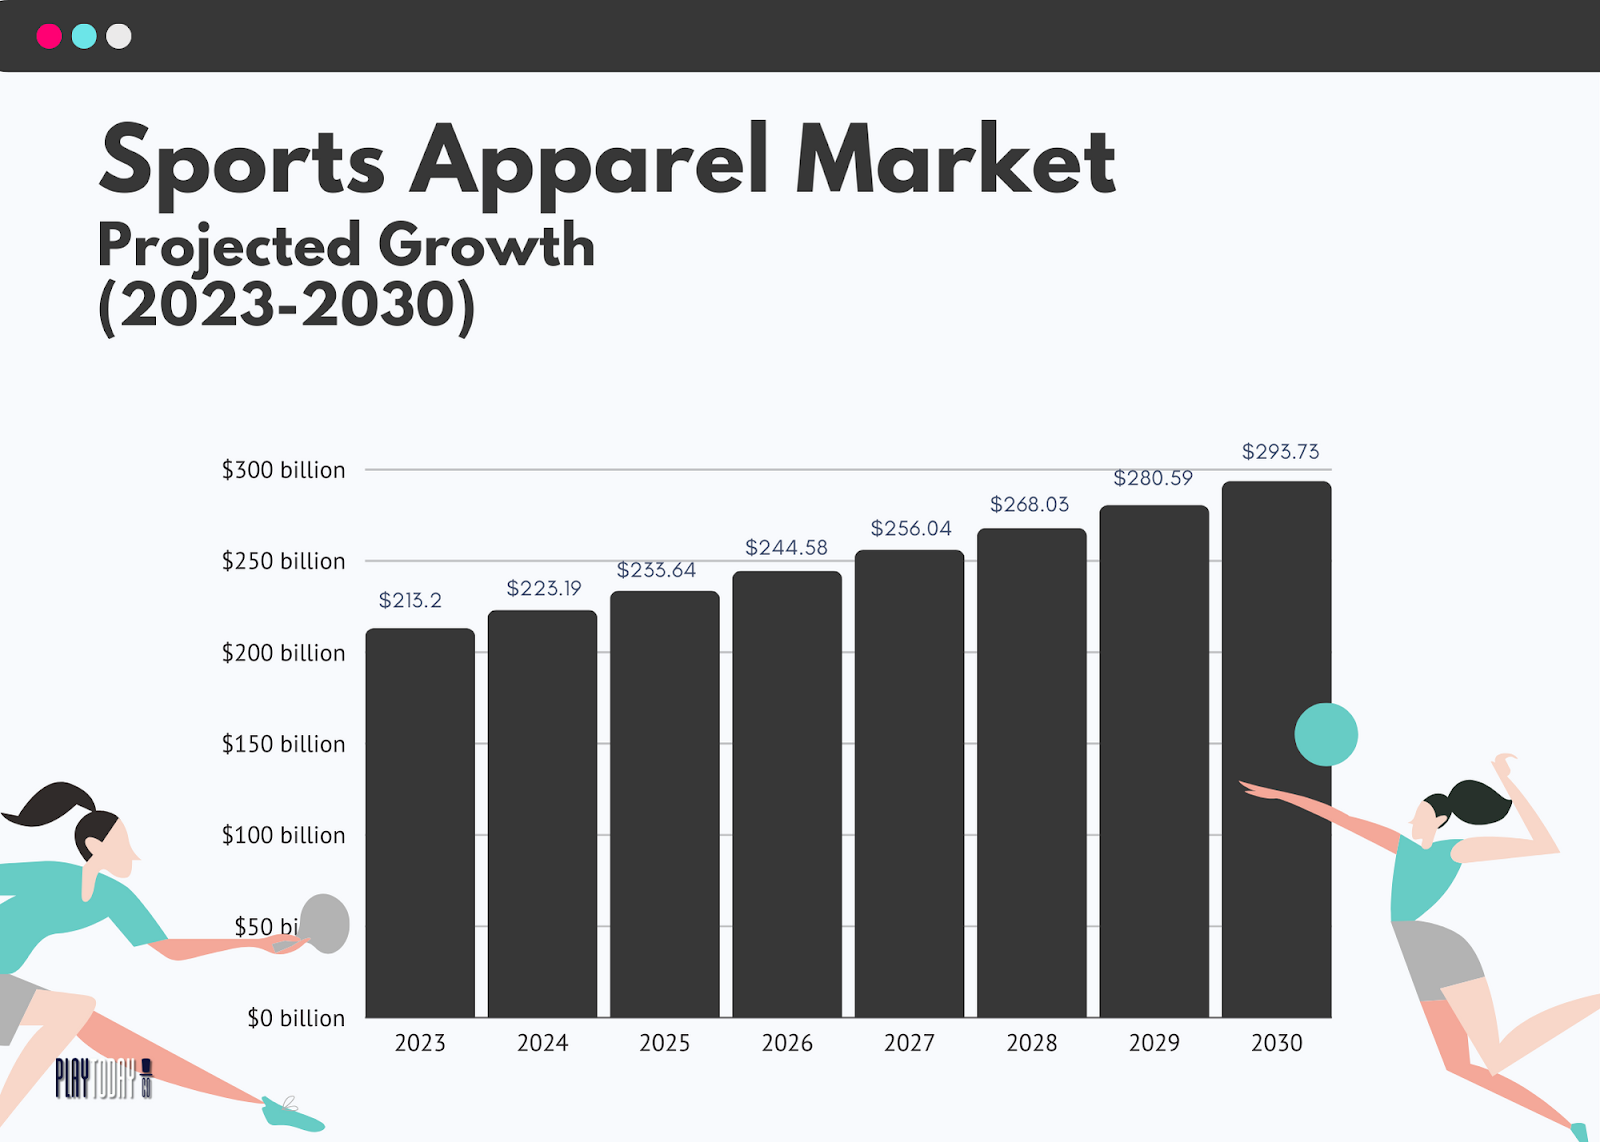 Adidas: Online Sales Growth & Leading Product Segments